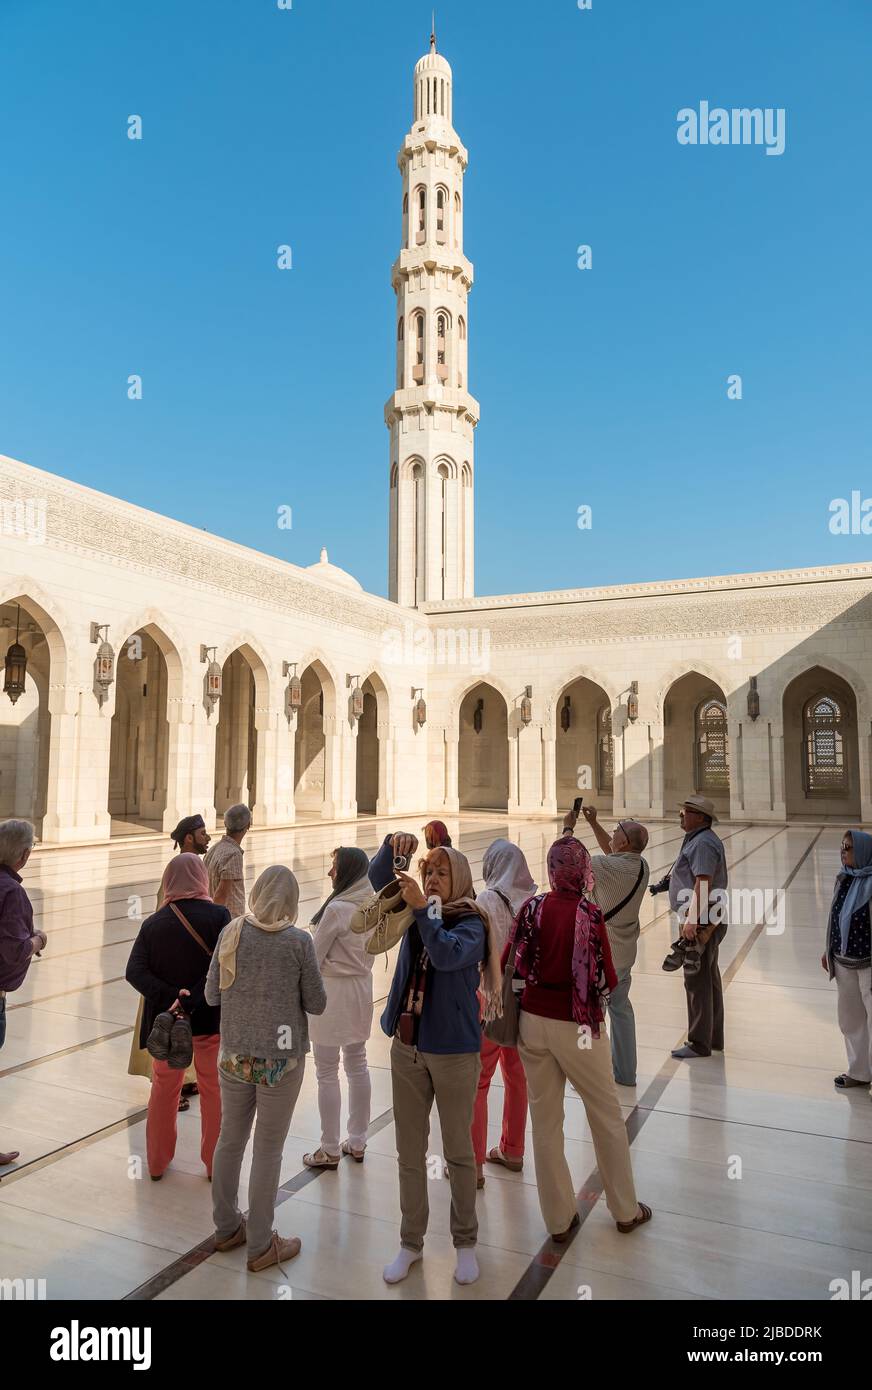 Muscat, Oman, Middle East - February 10, 2020: Tourists visiting the Sultan Qaboos Grand Mosque in Muscat. Oman tour. Stock Photo